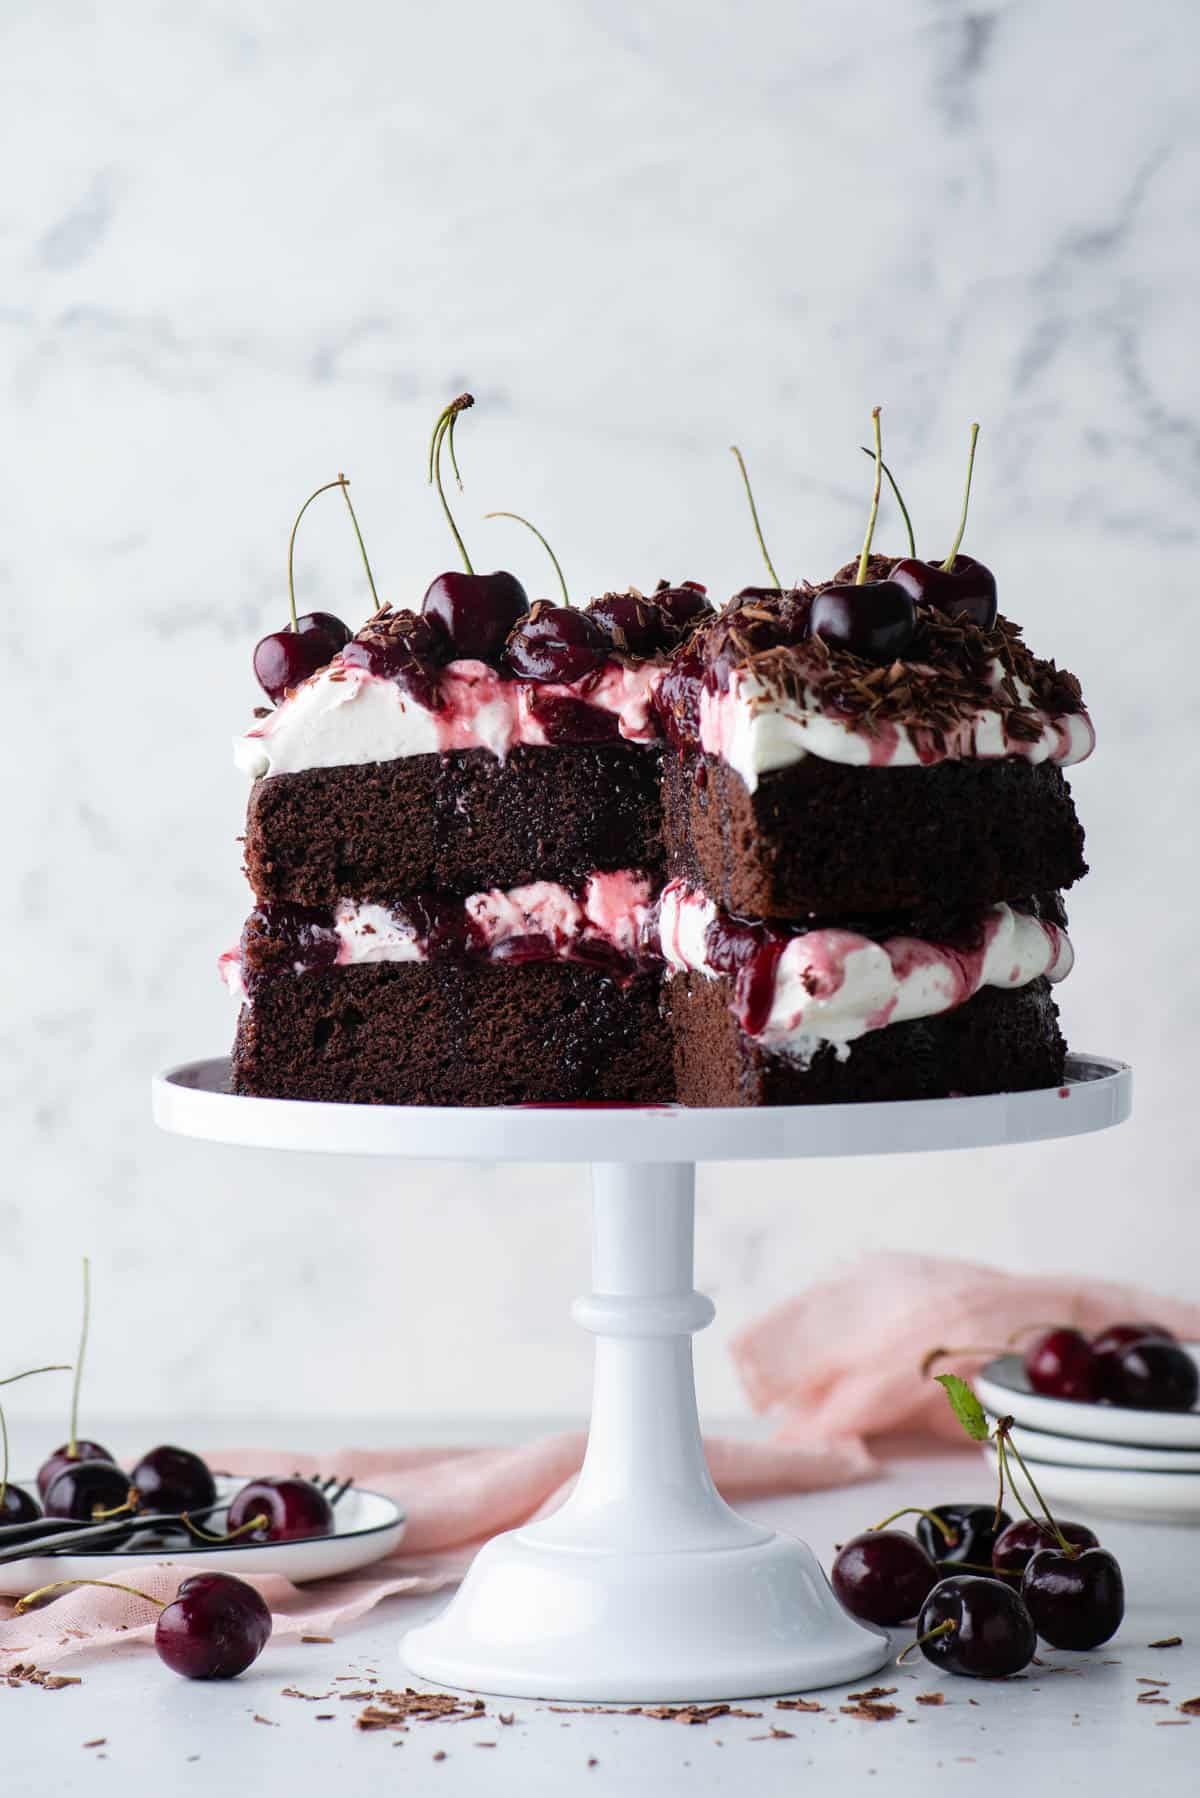 black forest cake on a white cake stand with a large slice taken out, with stacks of white plates and cherries scattered around